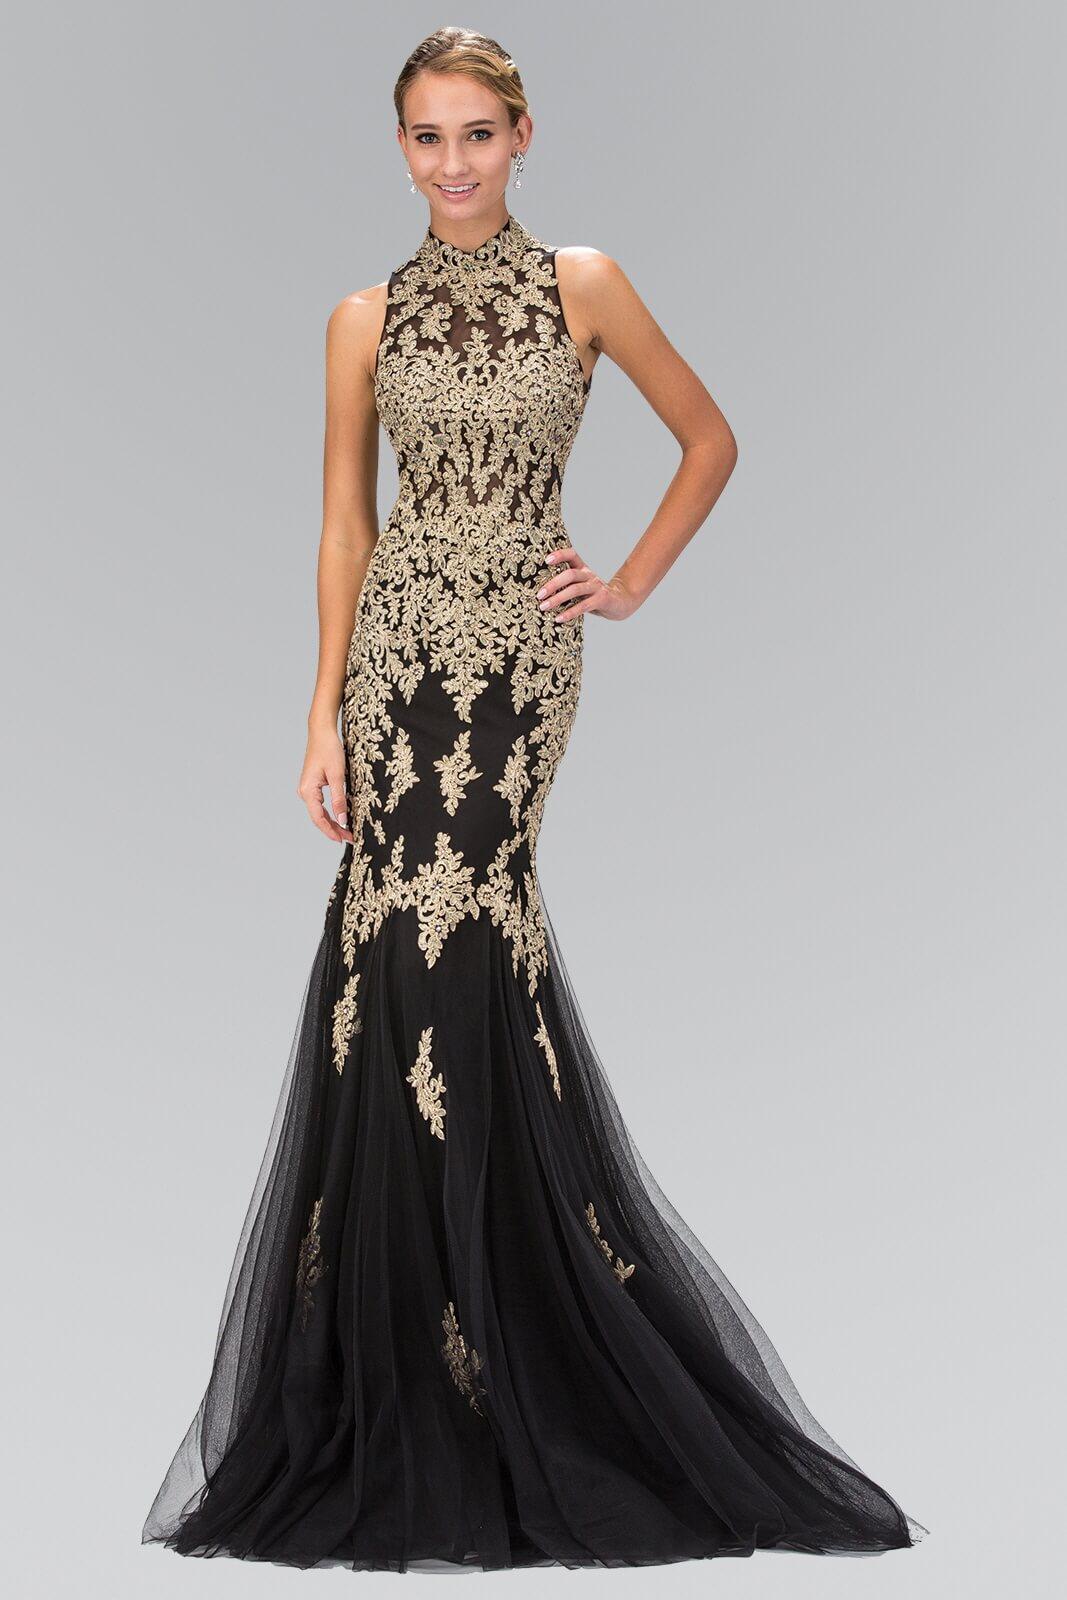 Prom Long Beaded Formal Evening Gown - The Dress Outlet Elizabeth K